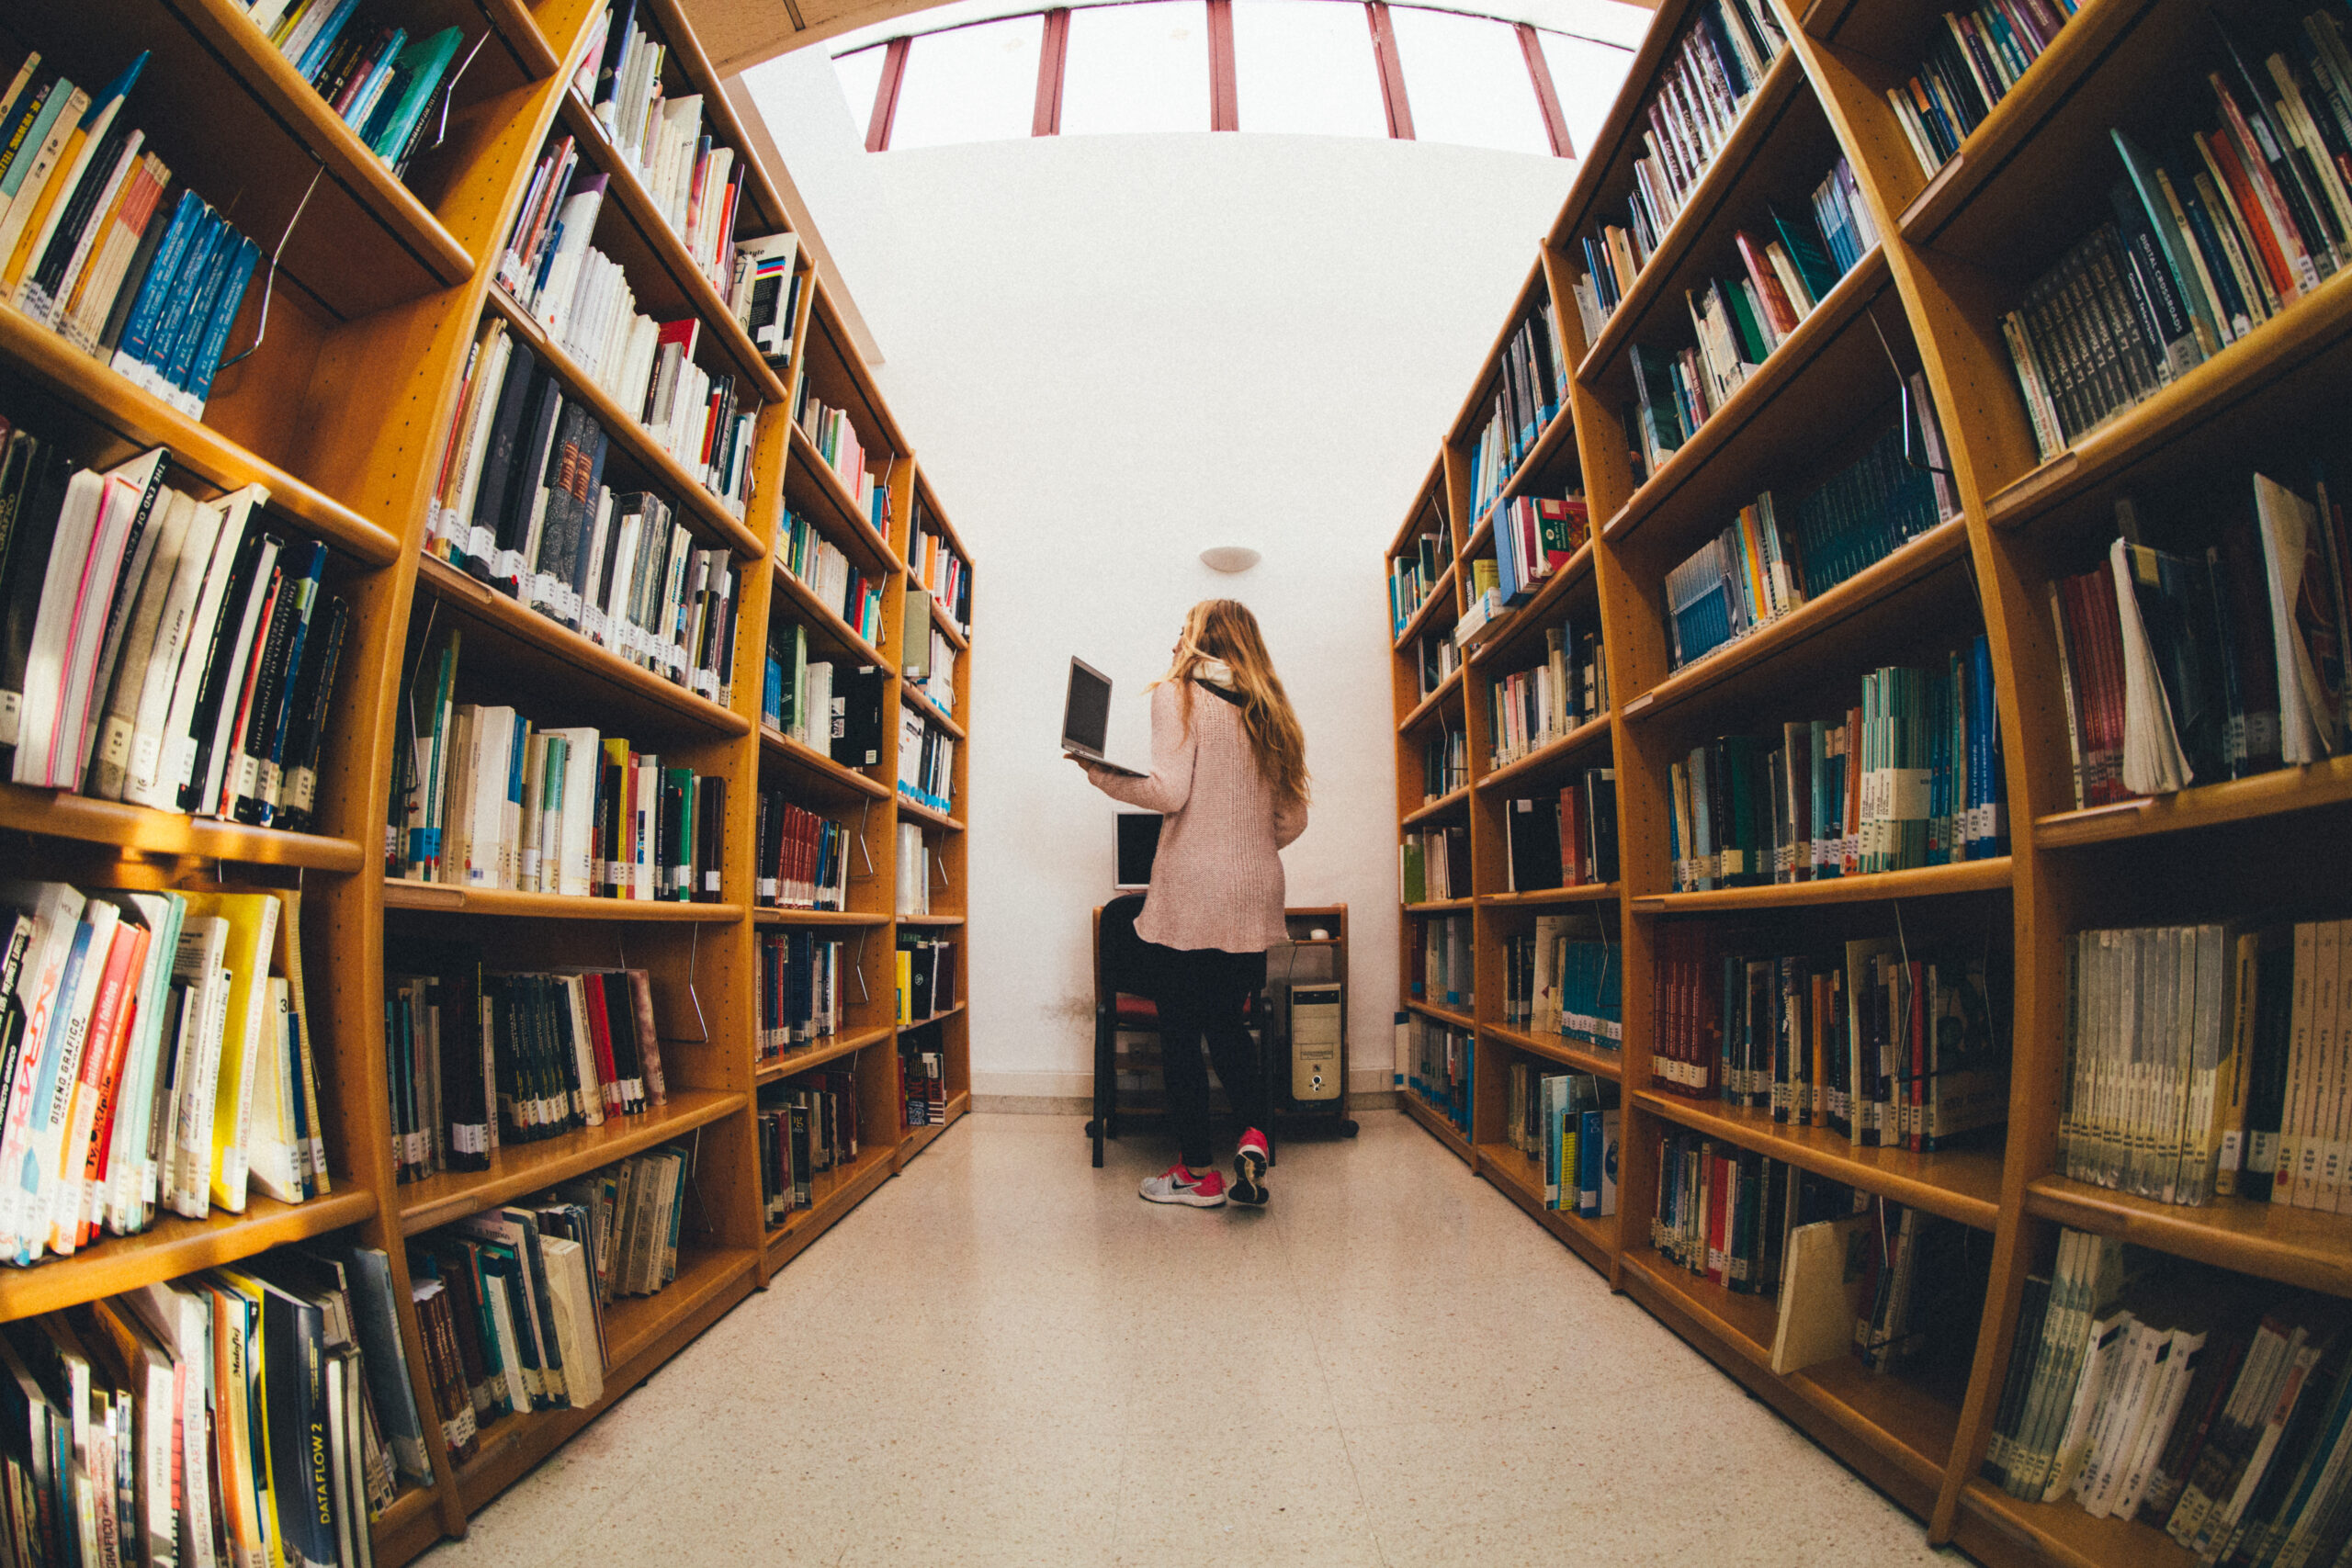 A women holding a laptop stands between library bookshelves looking at the books.